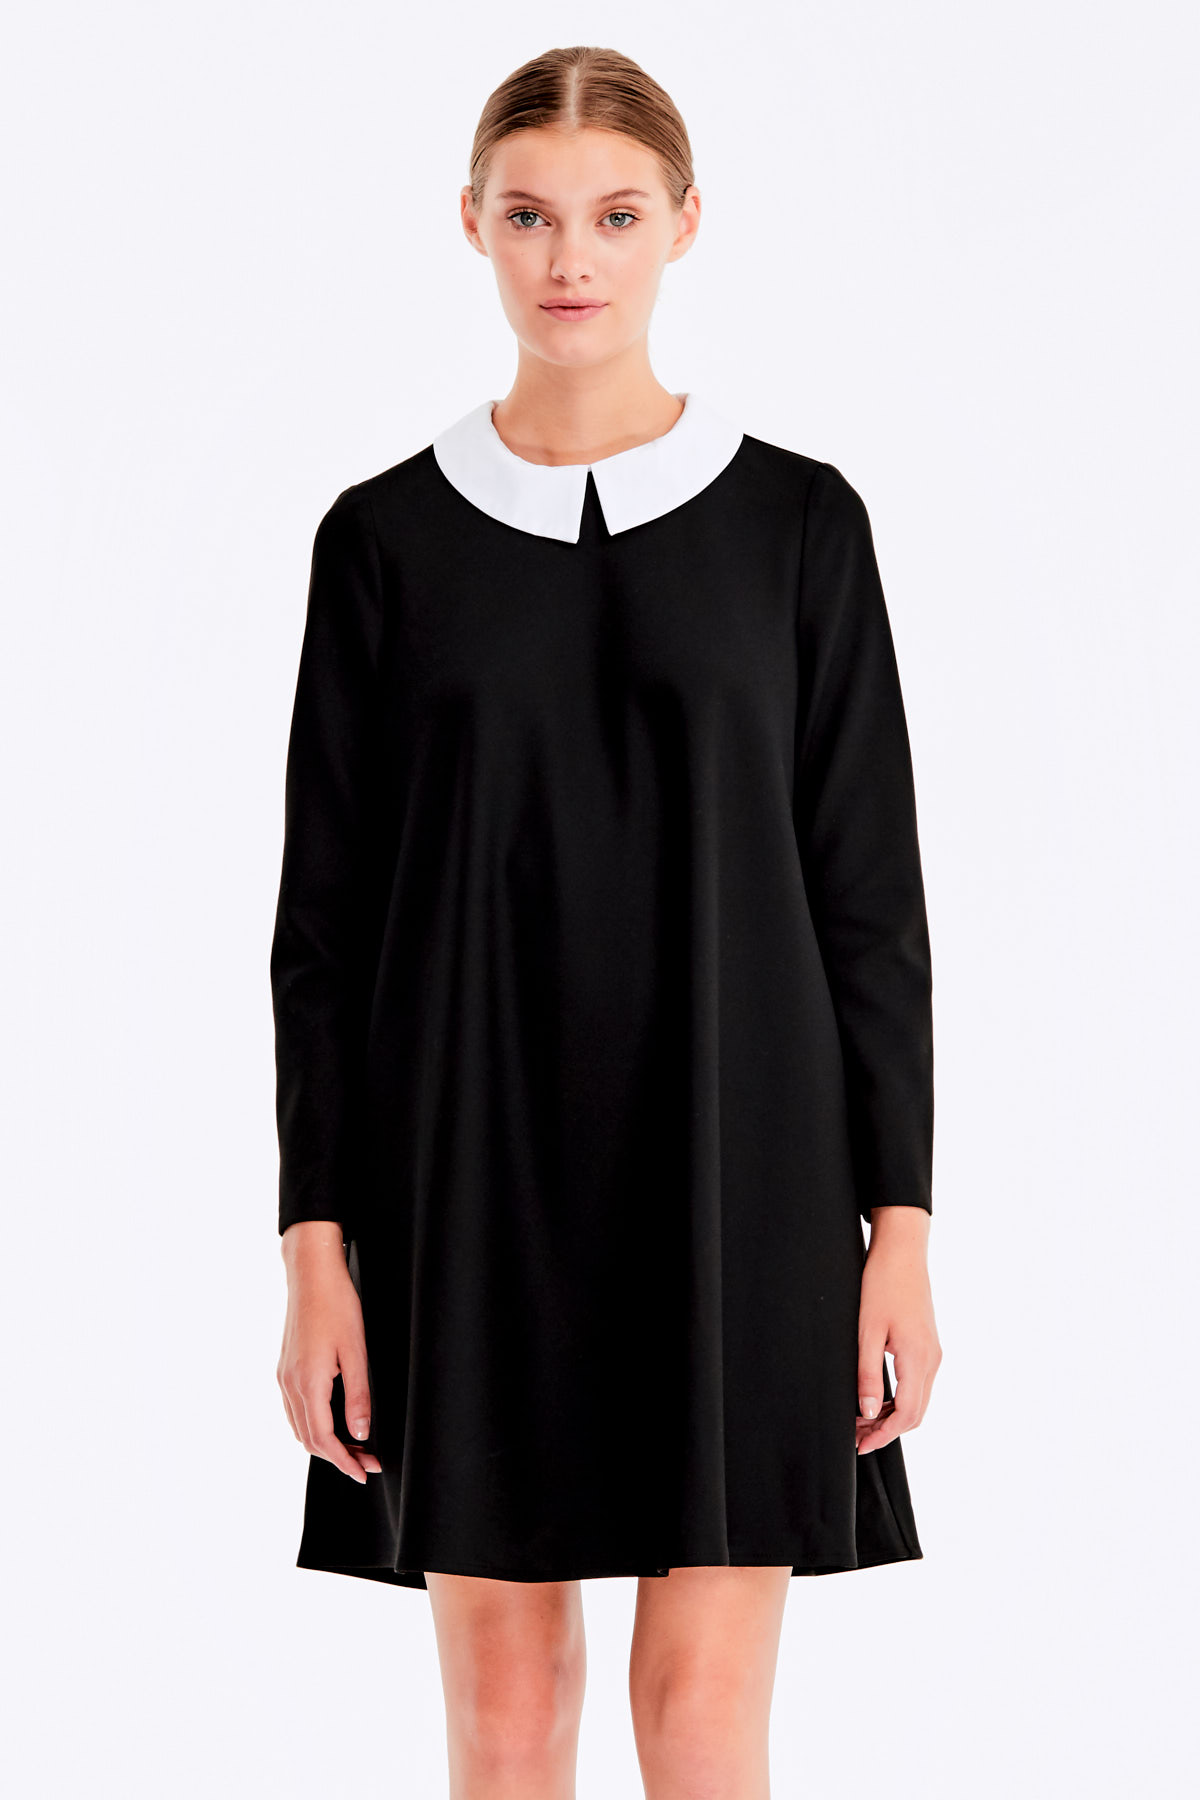 Loose-fitting black dress with a white collar , photo 2